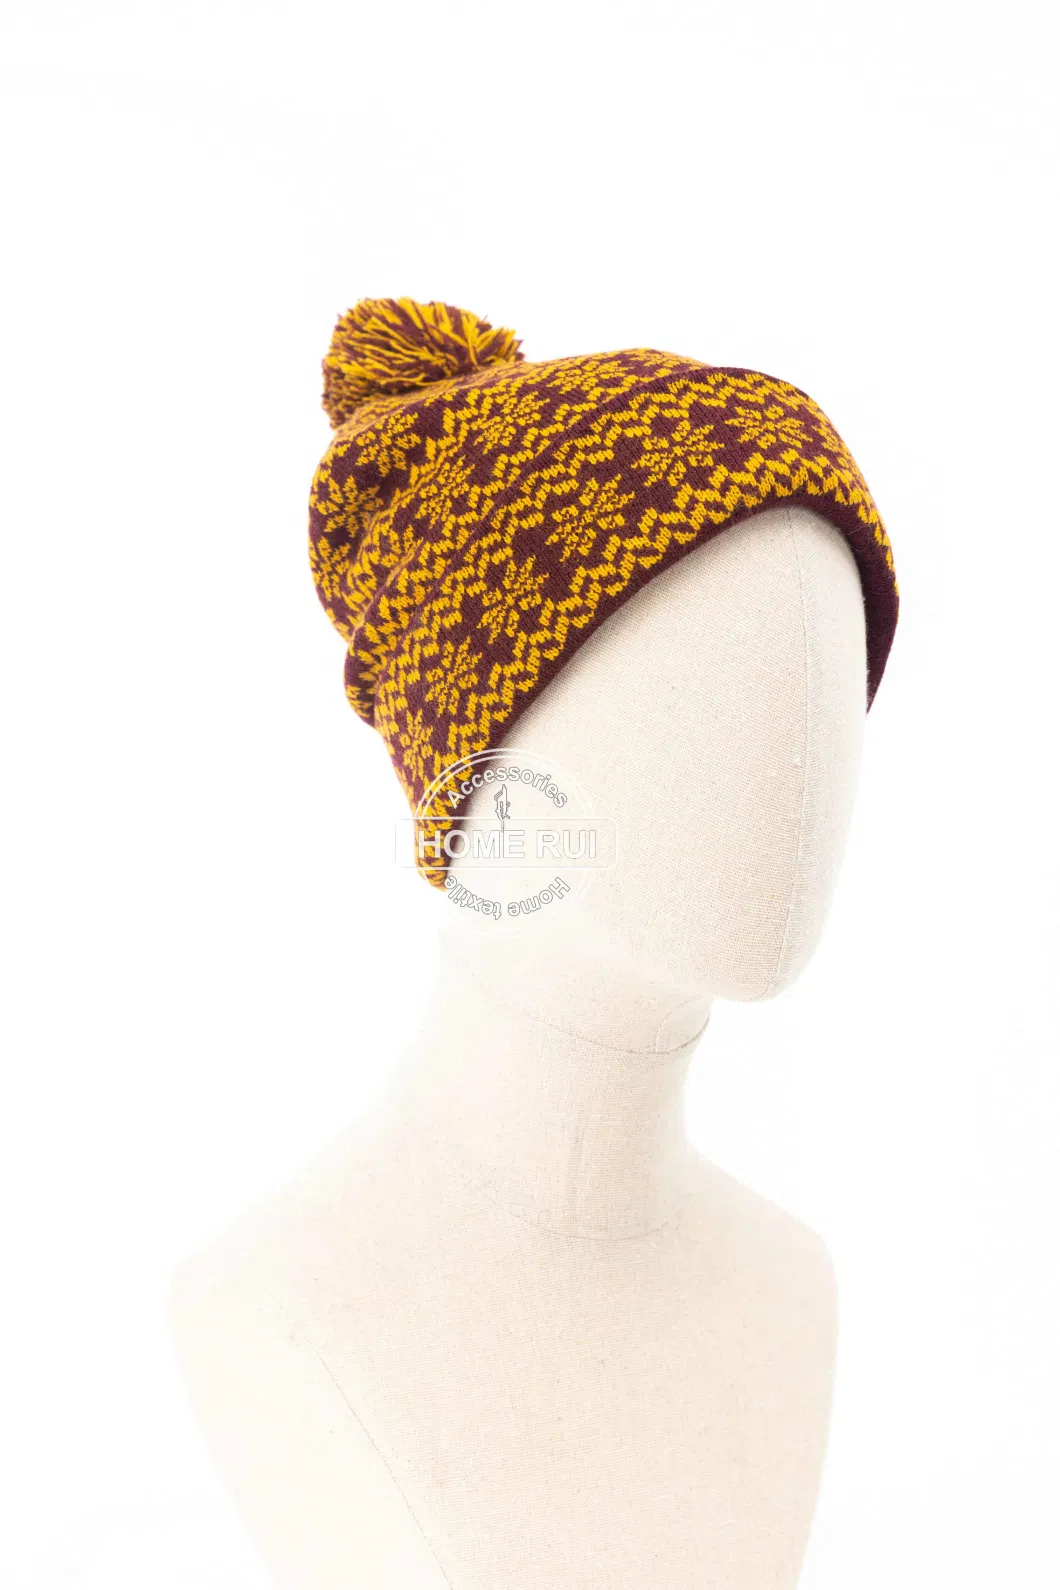 Outdoor Lady Girls POM Snowboard Casual Floppy Slouchy Snow Christmas Textured Mustard Cap Beanie